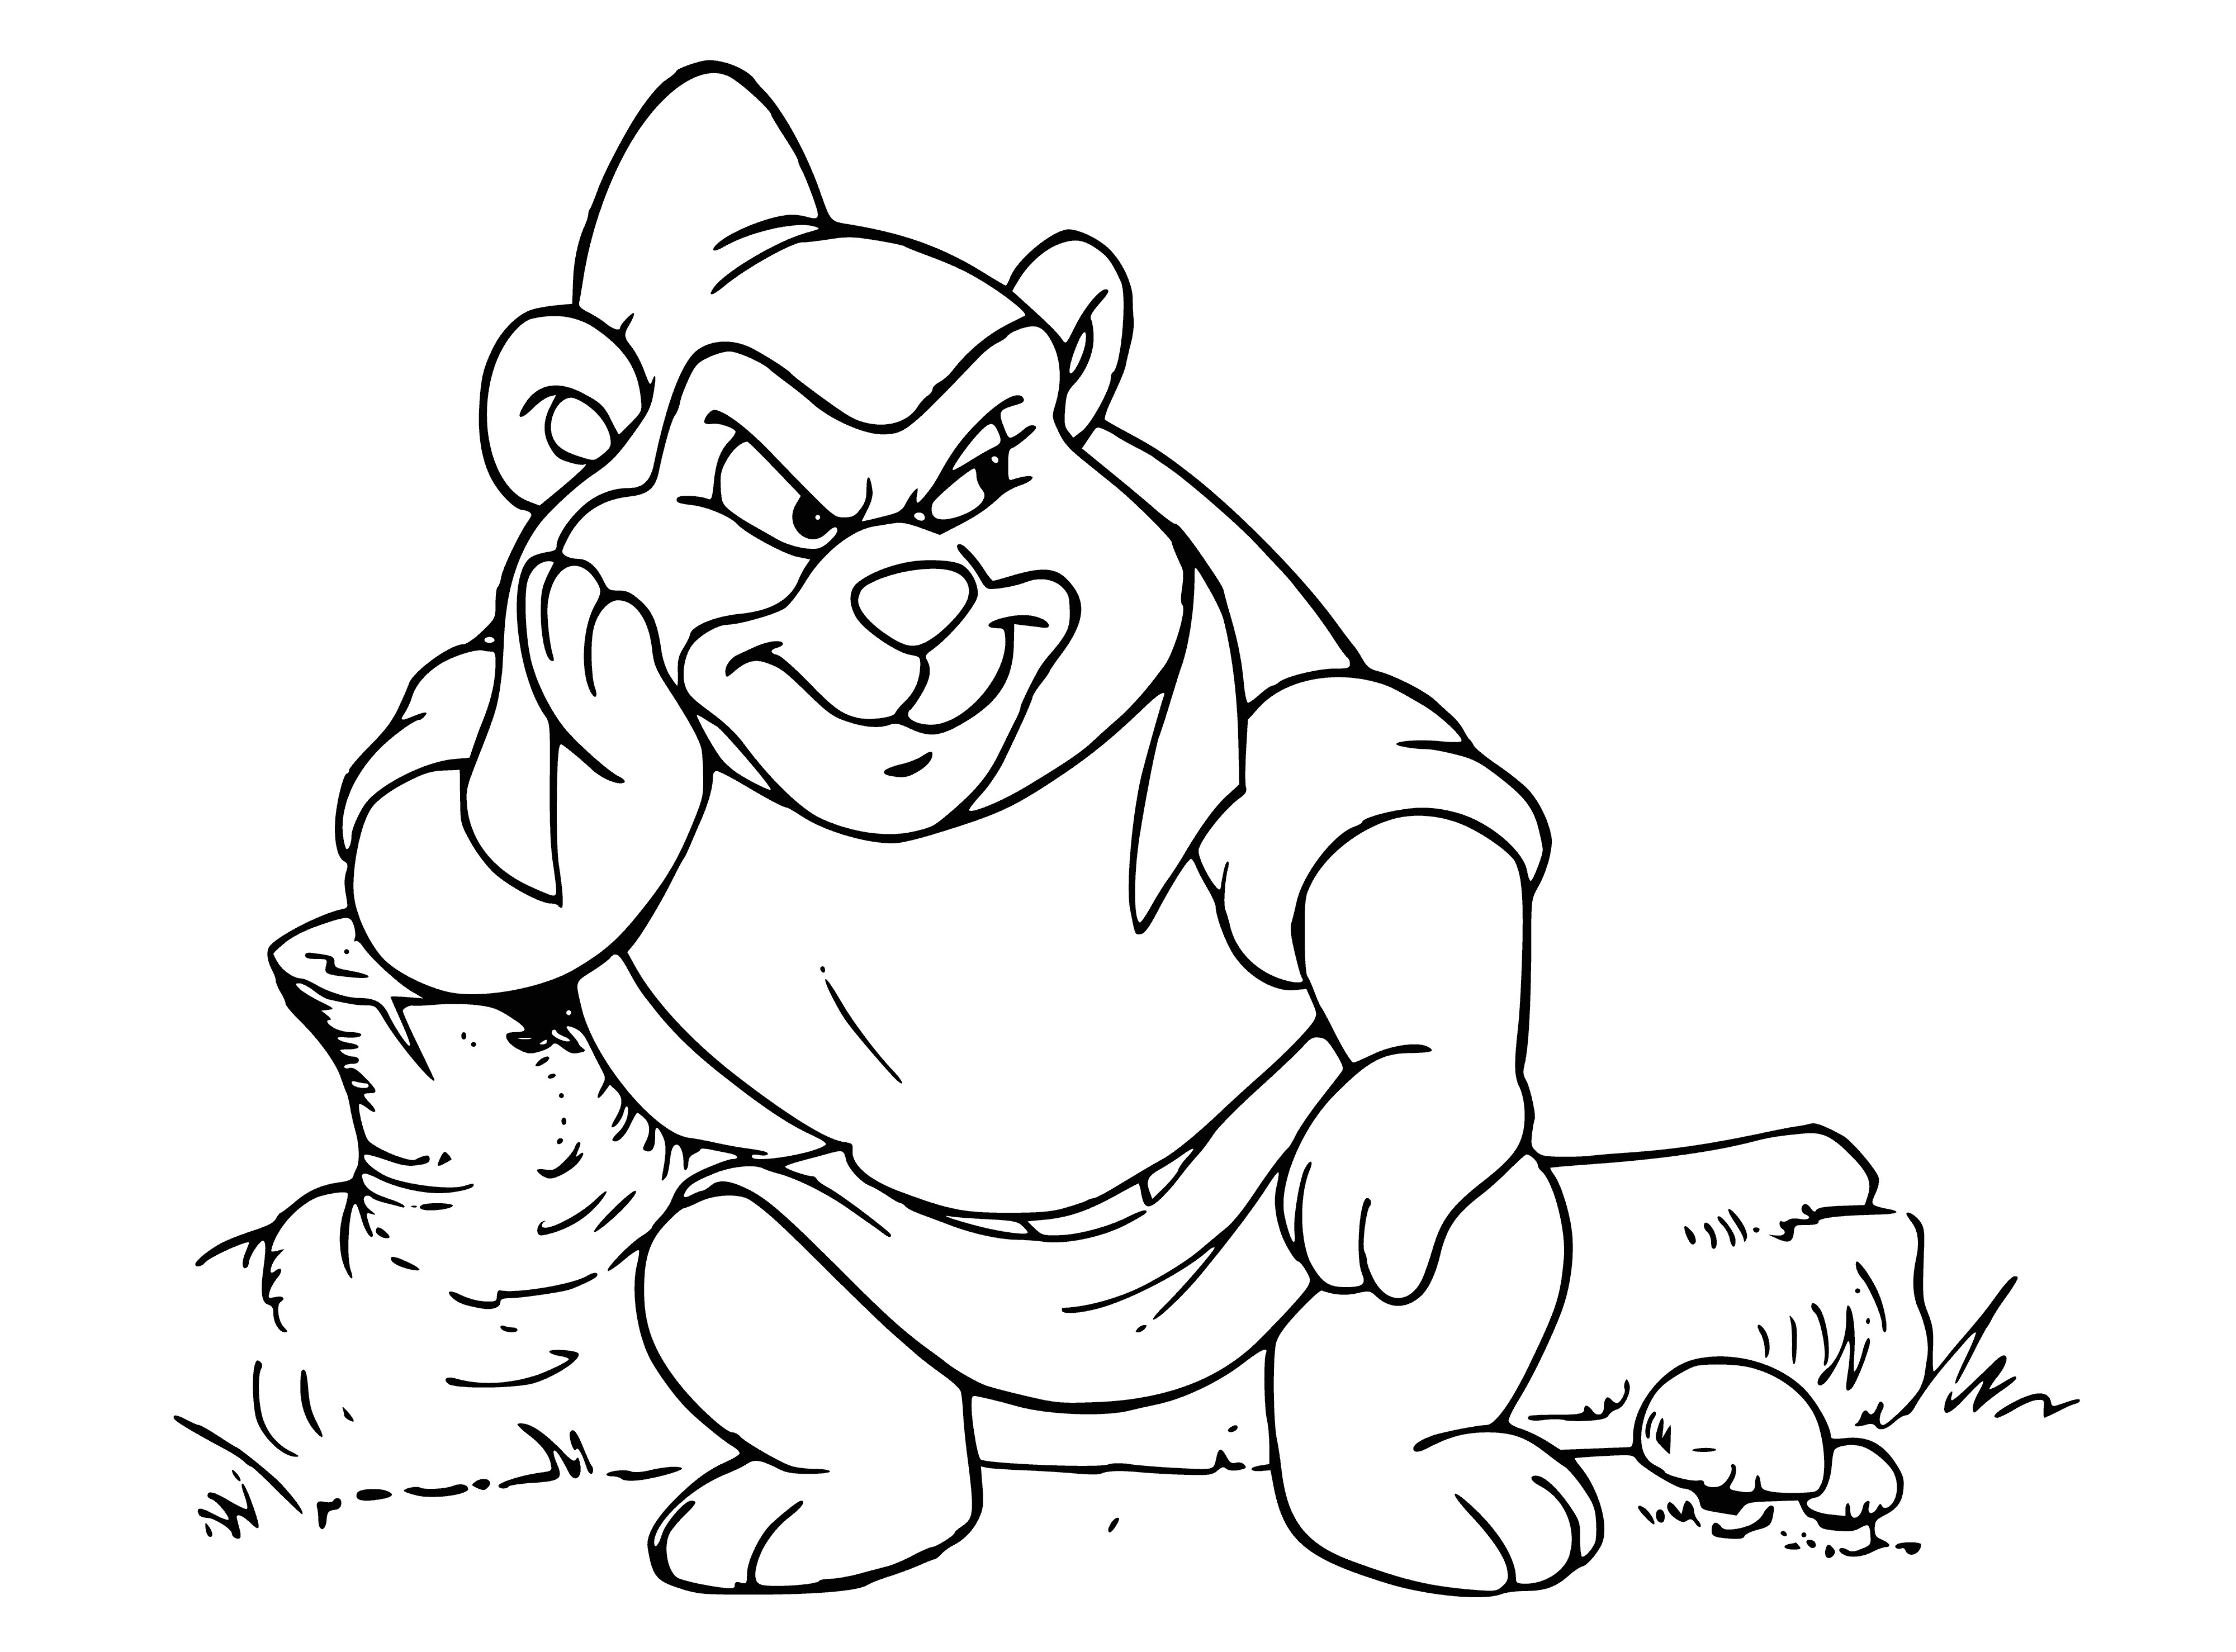 coloring page: A large green gummi bear is in the center of the coloring page, its arms and legs spread out, smiling and with a thick, fluffy fur. To the left is a smaller brown bear with a smaller belly and thinner fur. To the right is an even smaller yellow bear with arms and legs close to its body, a small belly and thin fur.